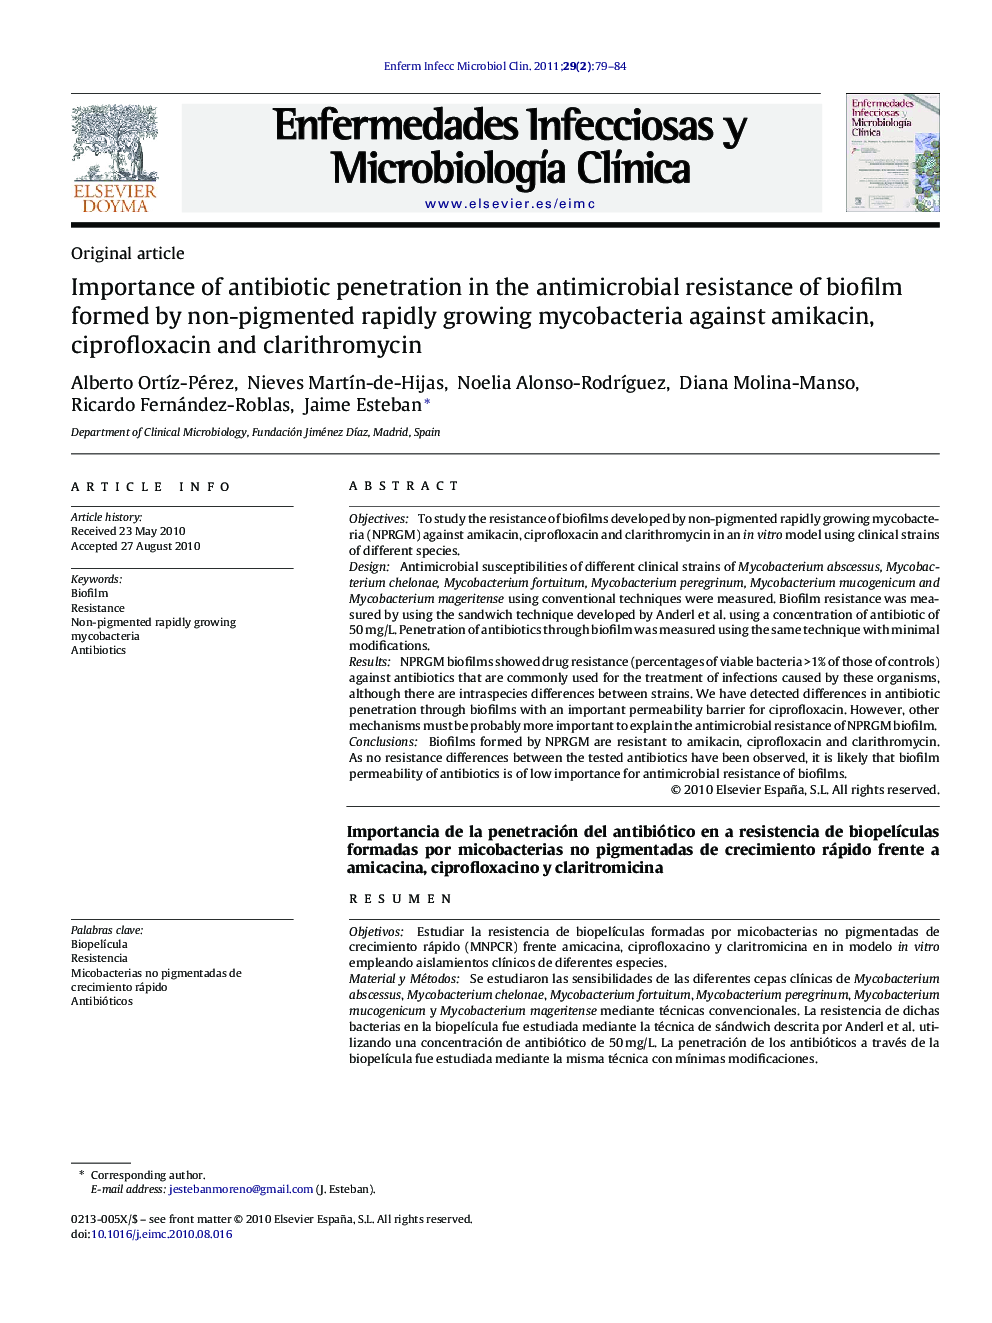 Importance of antibiotic penetration in the antimicrobial resistance of biofilm formed by non-pigmented rapidly growing mycobacteria against amikacin, ciprofloxacin and clarithromycin